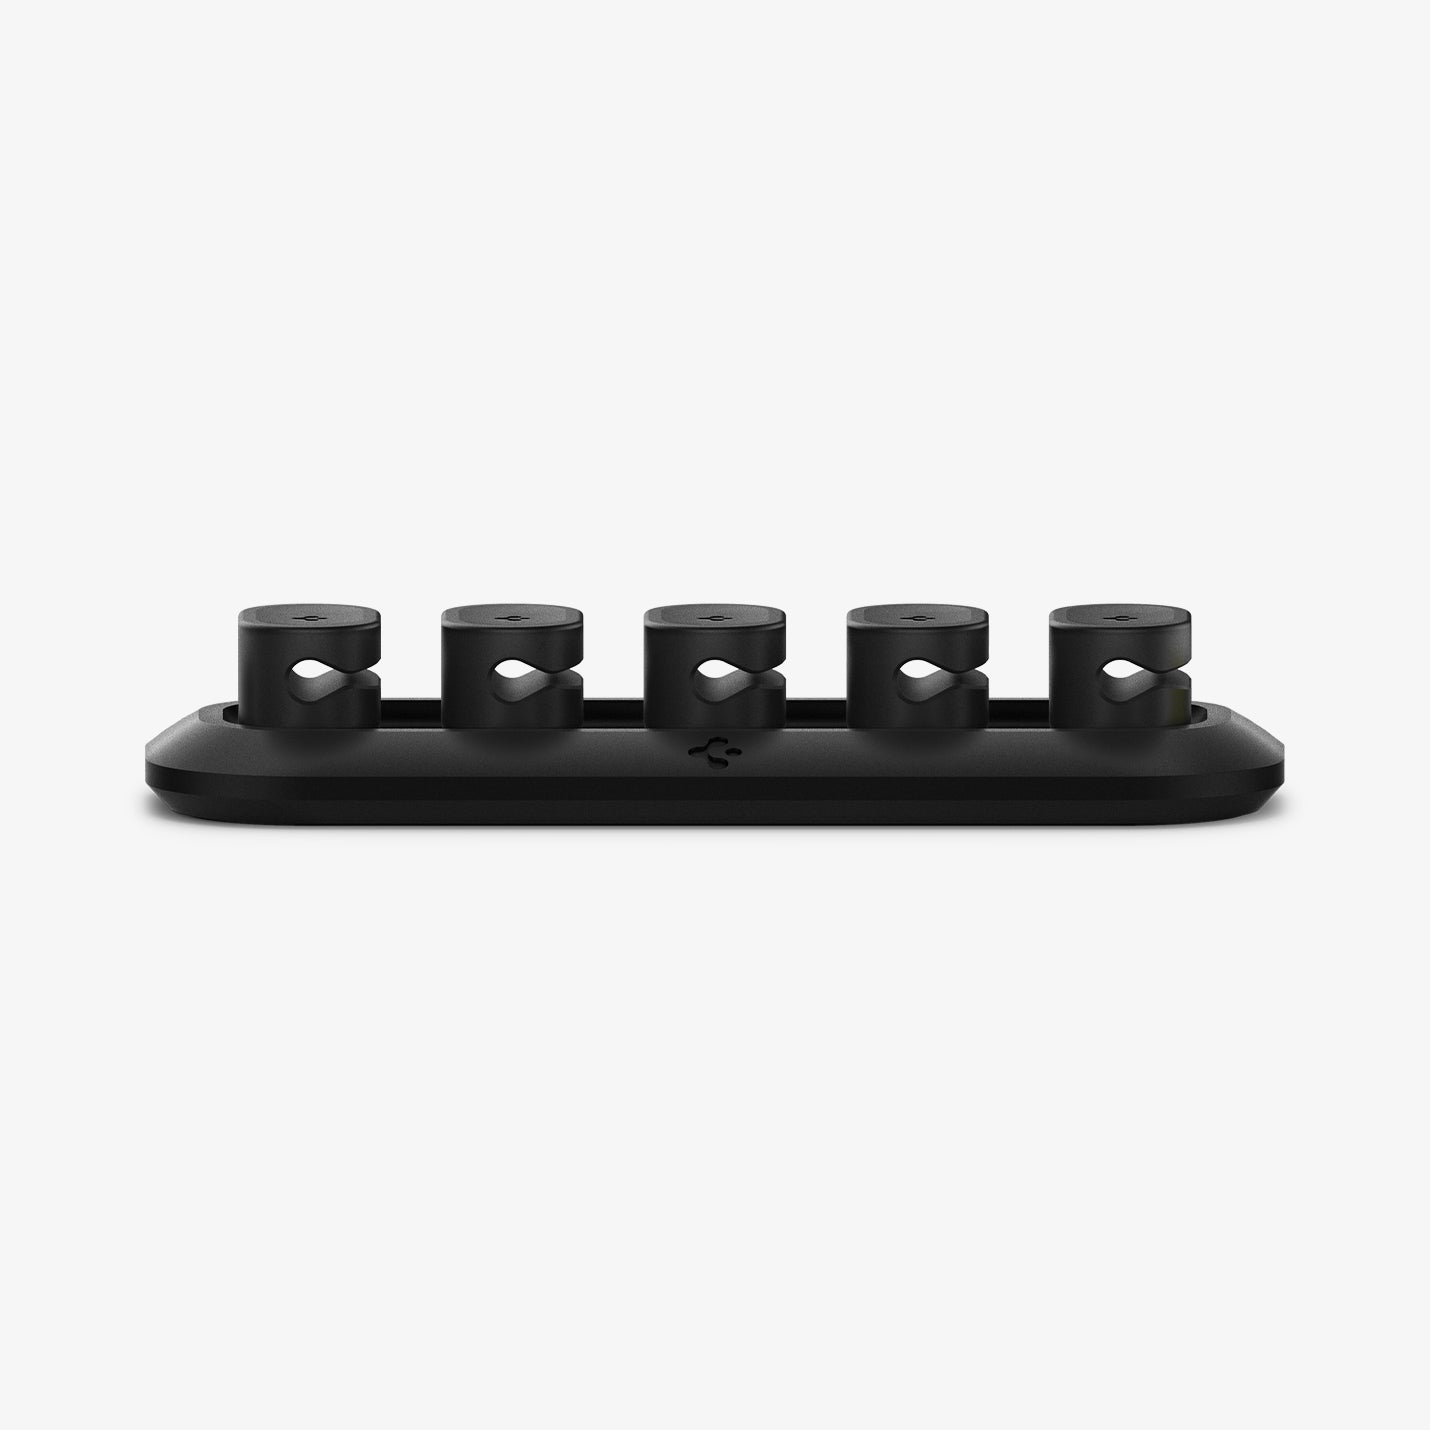 ACA04604 - LD101 Magnetic Cable Holder in black showing the sides and partial top